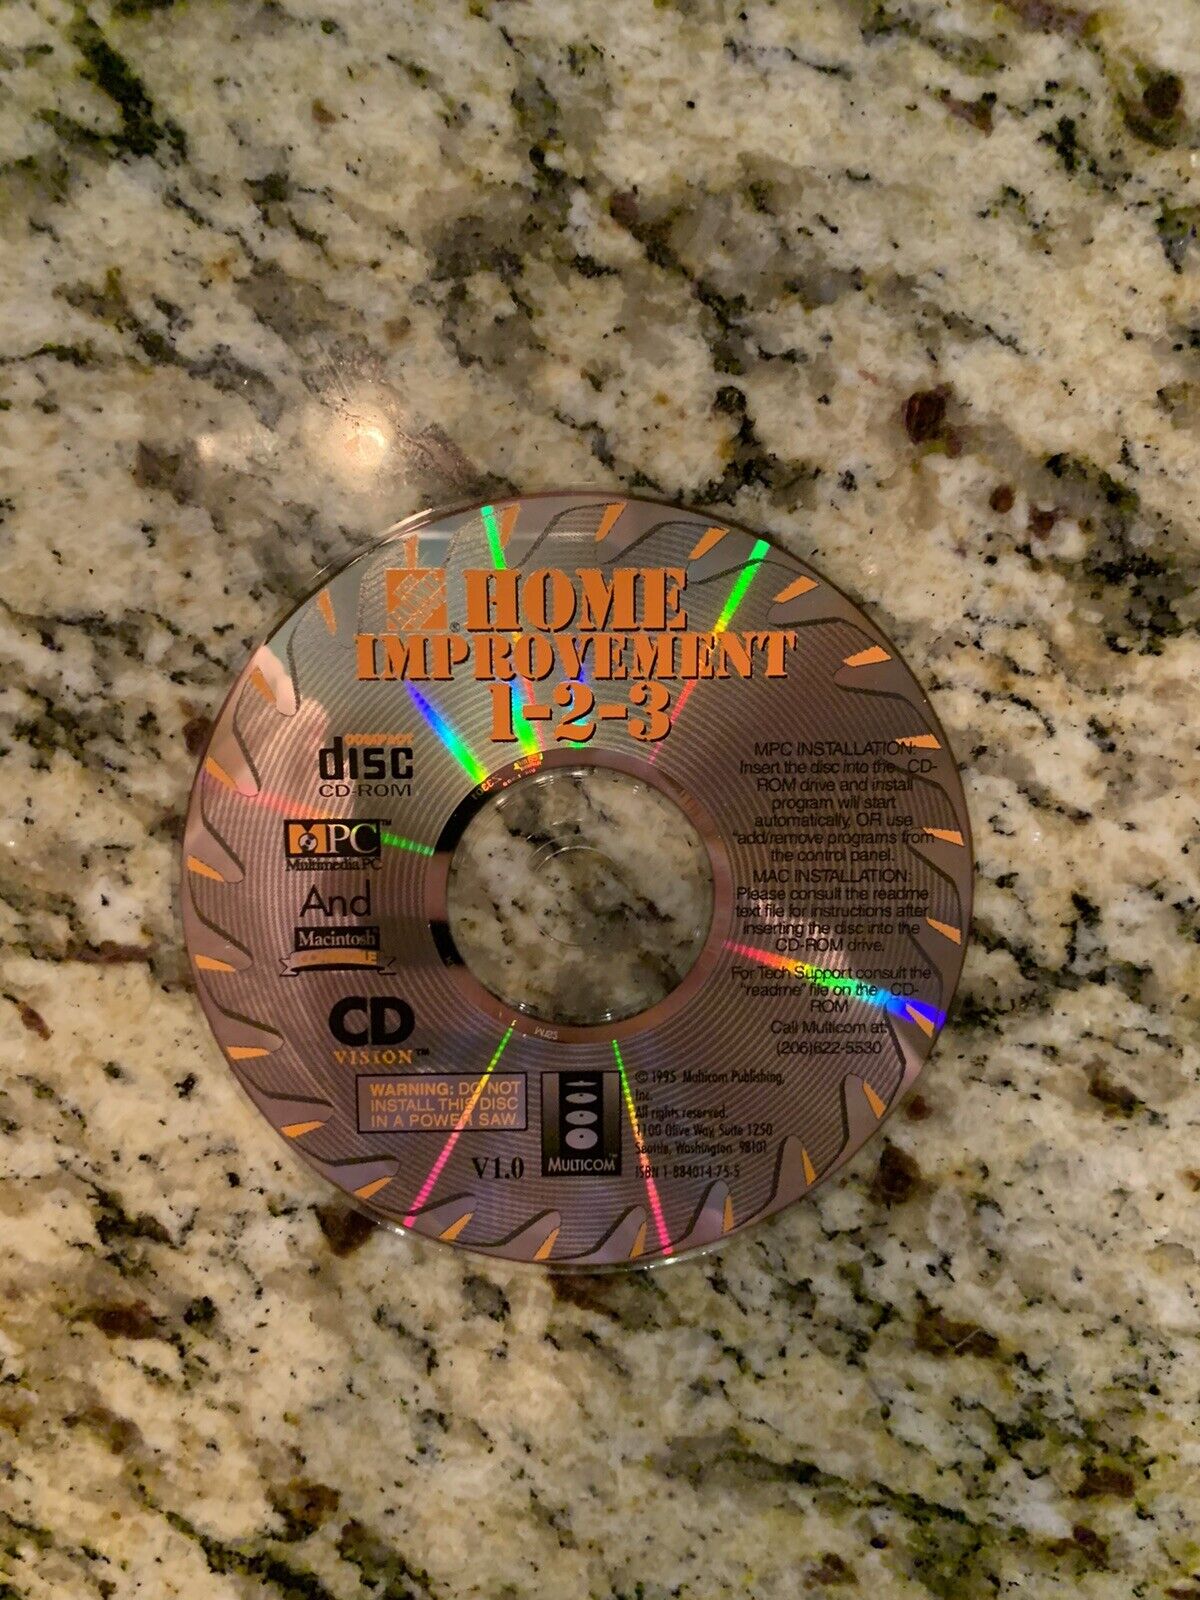 The Home Depot Home Improvement 1-2-3  (Vintage PC CD-ROM, 2002)